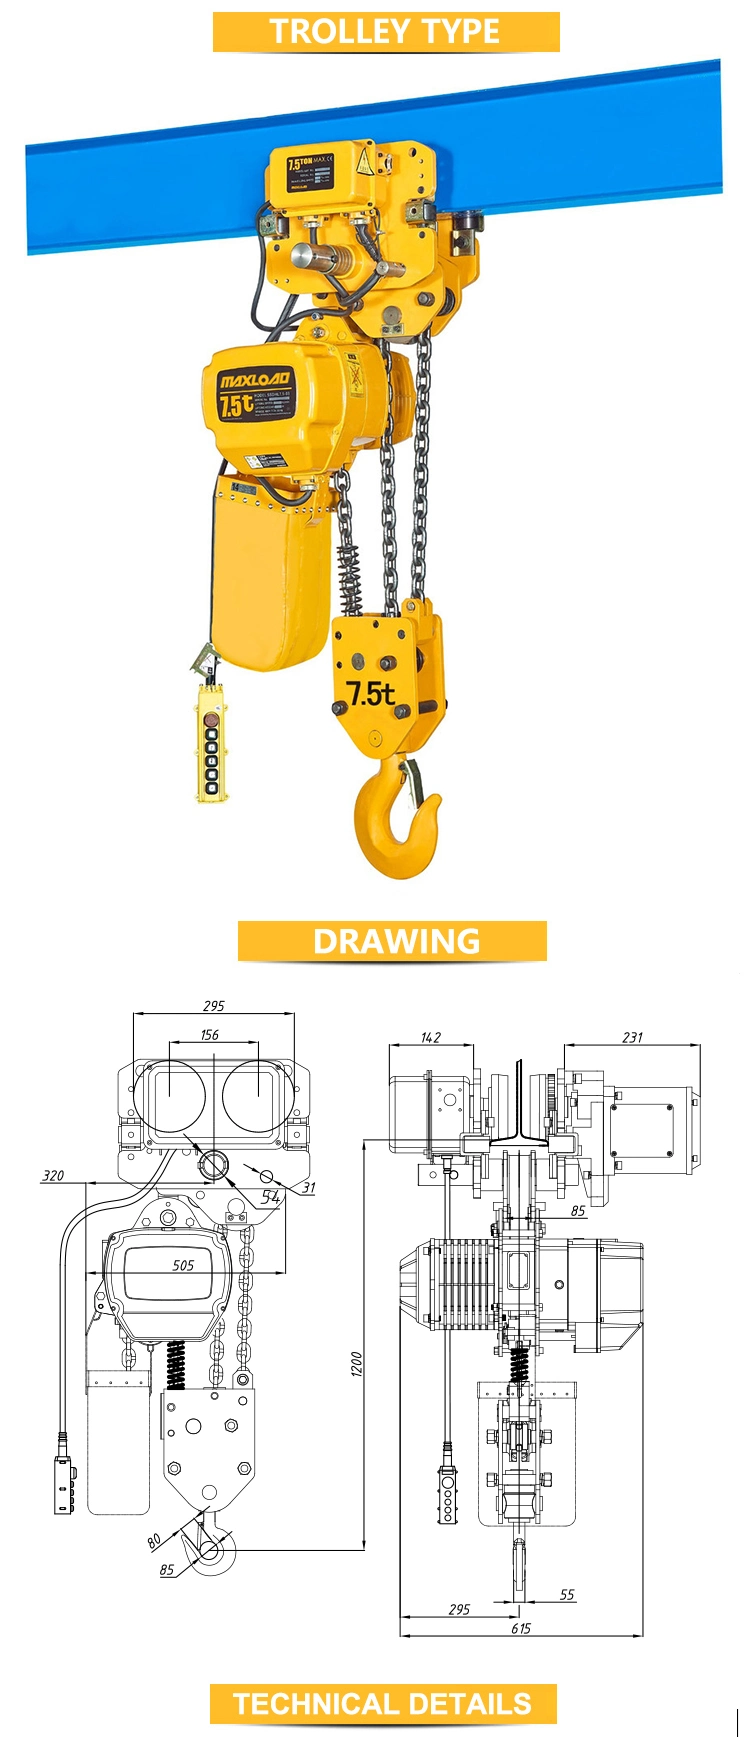 7.5ton Electric Boat Anchor Winch Electric Chain Hoist 220V/440V 2000kg with Load Limiter Hook